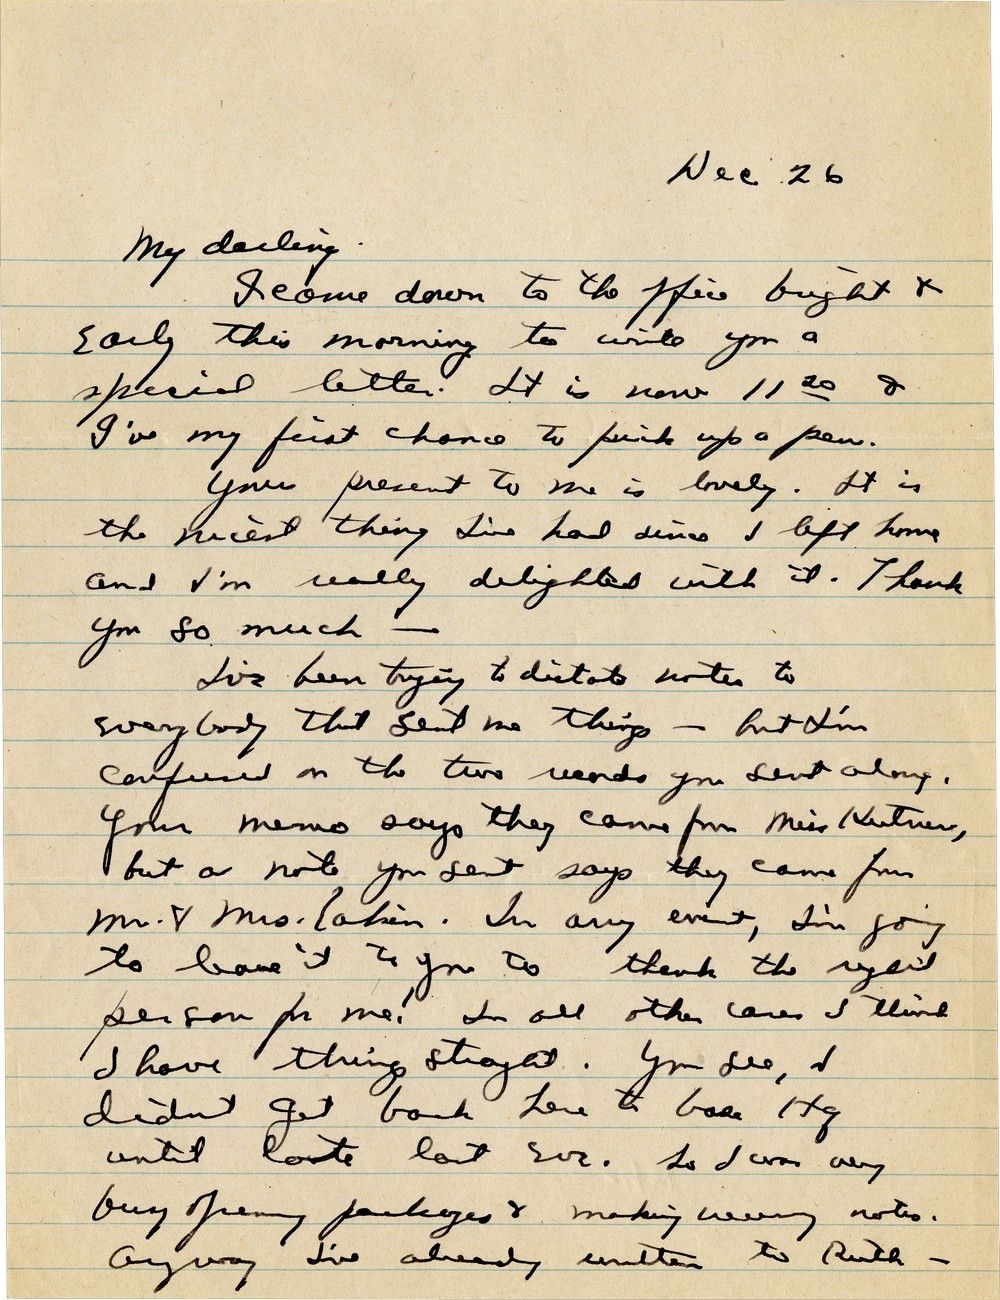 Homesick General Eisenhower Writes of a WWII Visit to Jerusalem and Levant at Christmas